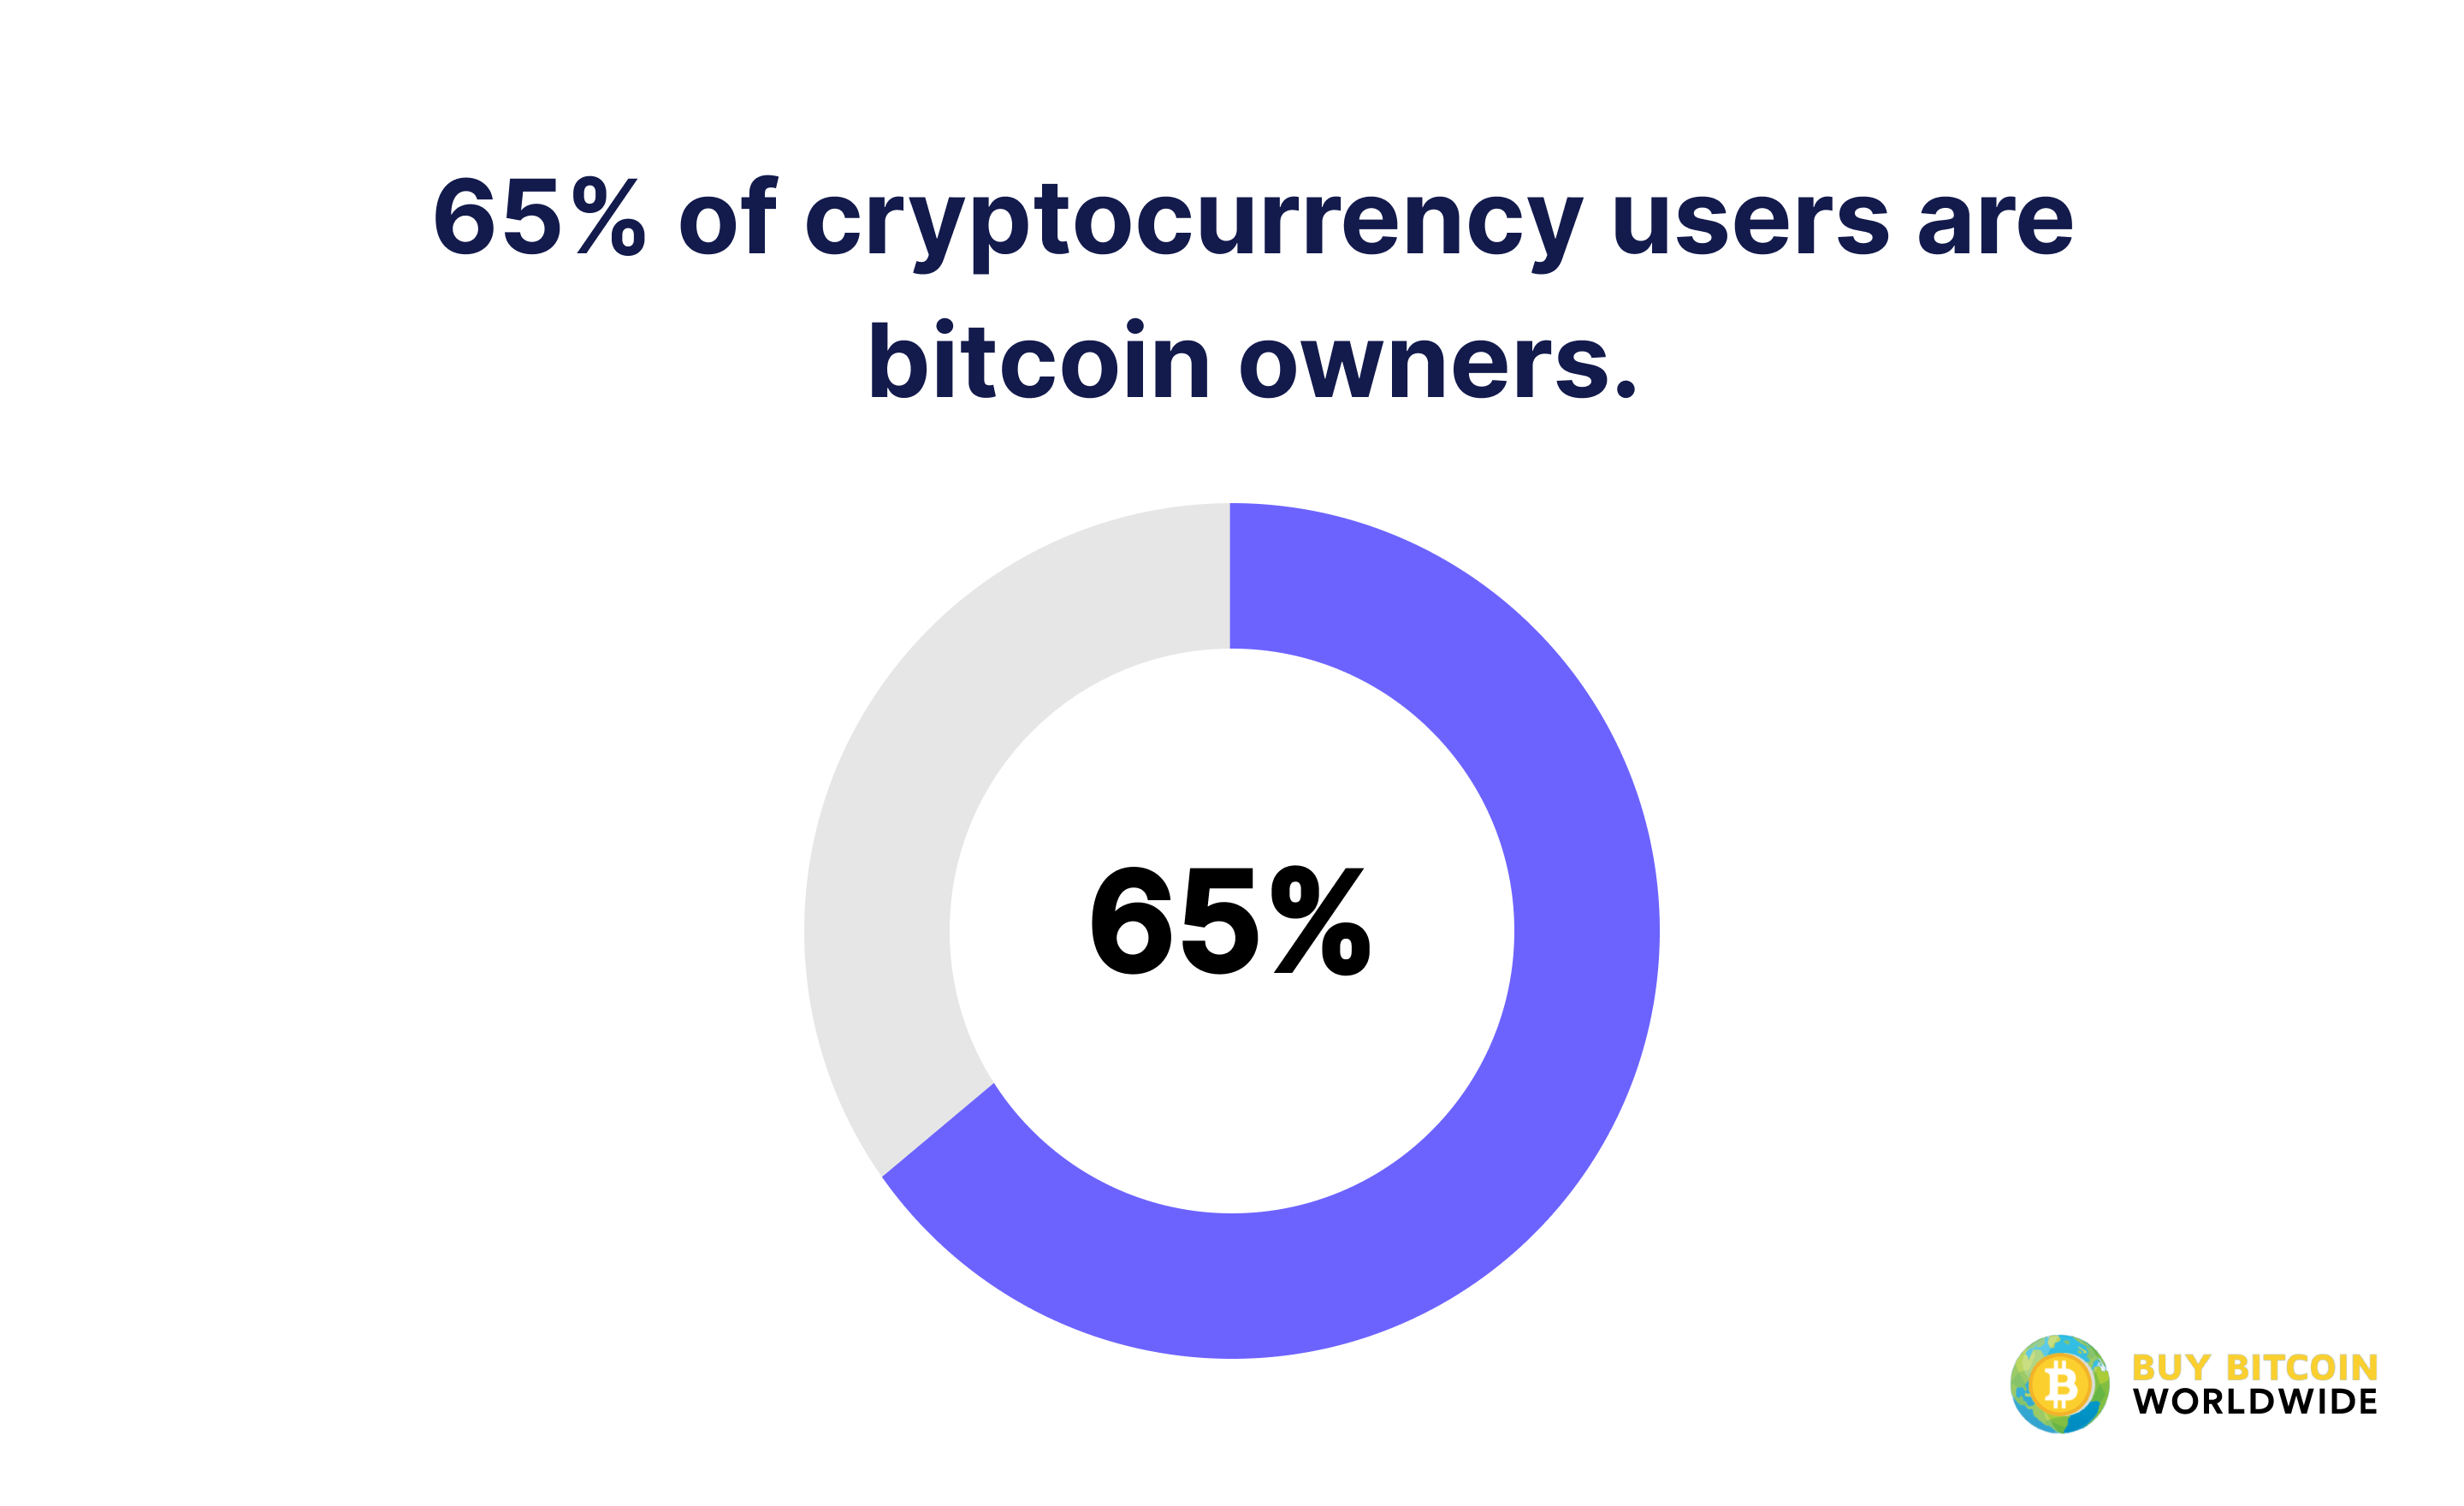 most crypto users are bitcoin users